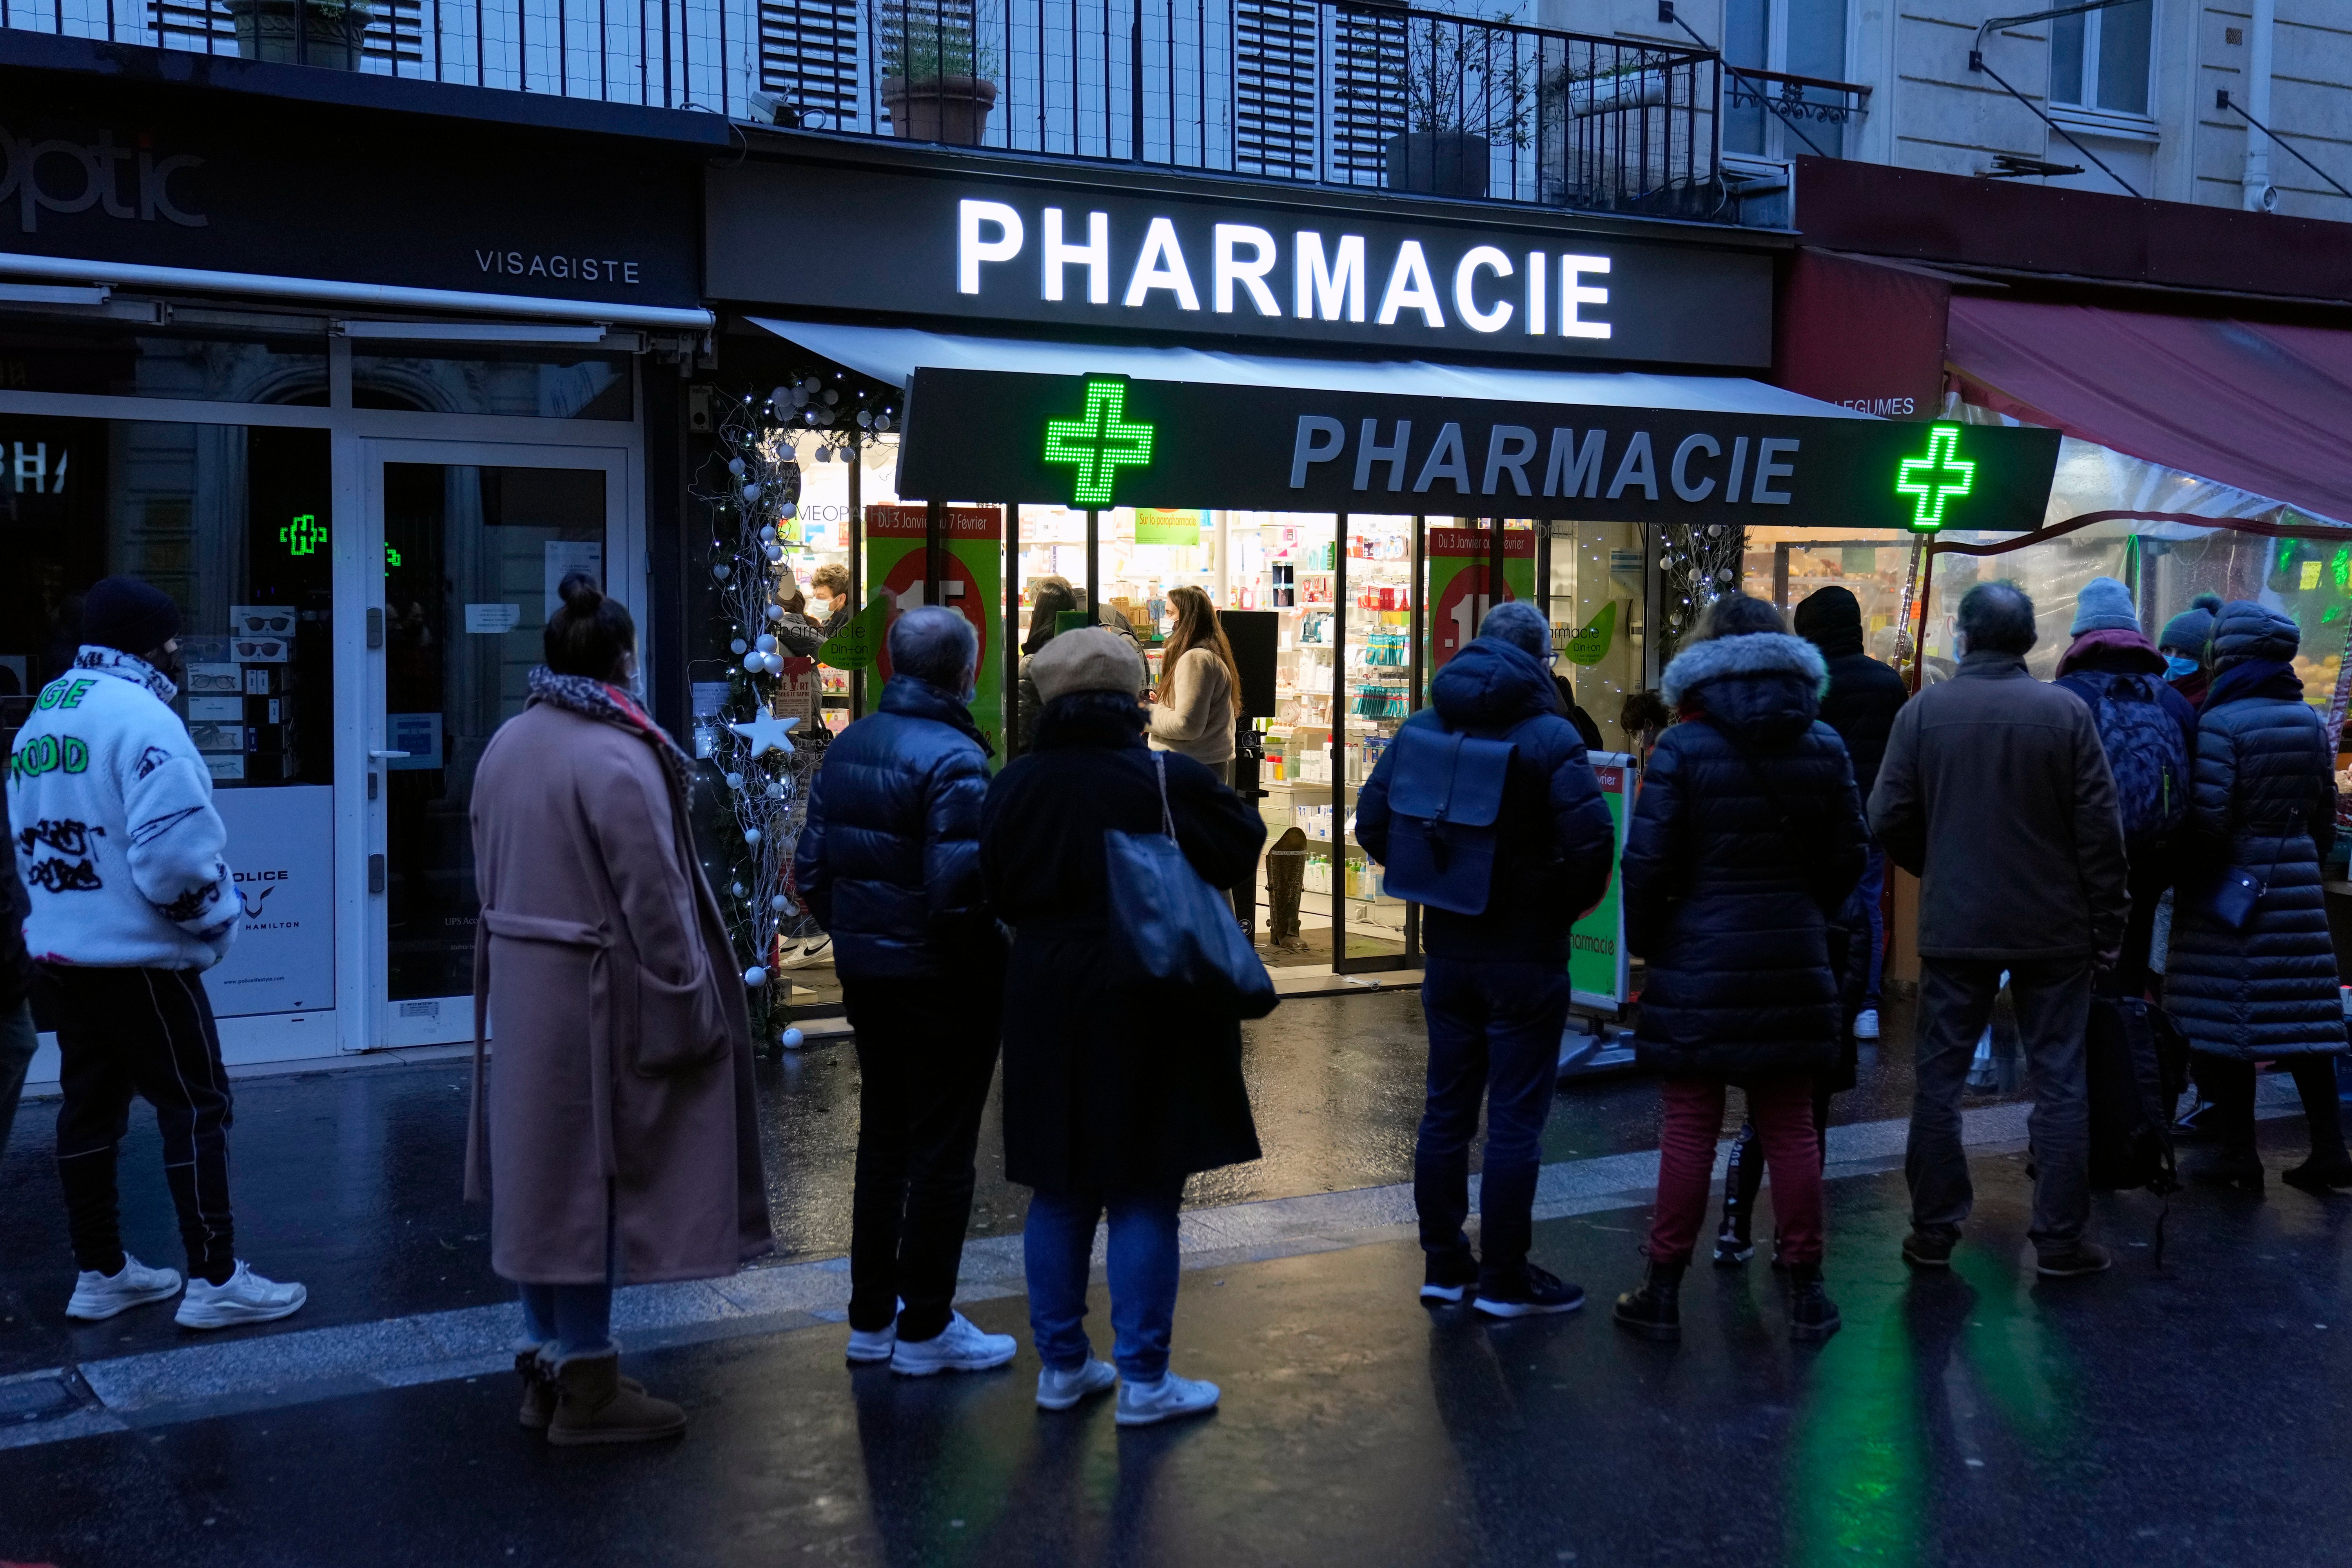 Parisians wait outside a pharmacy for Covid tests